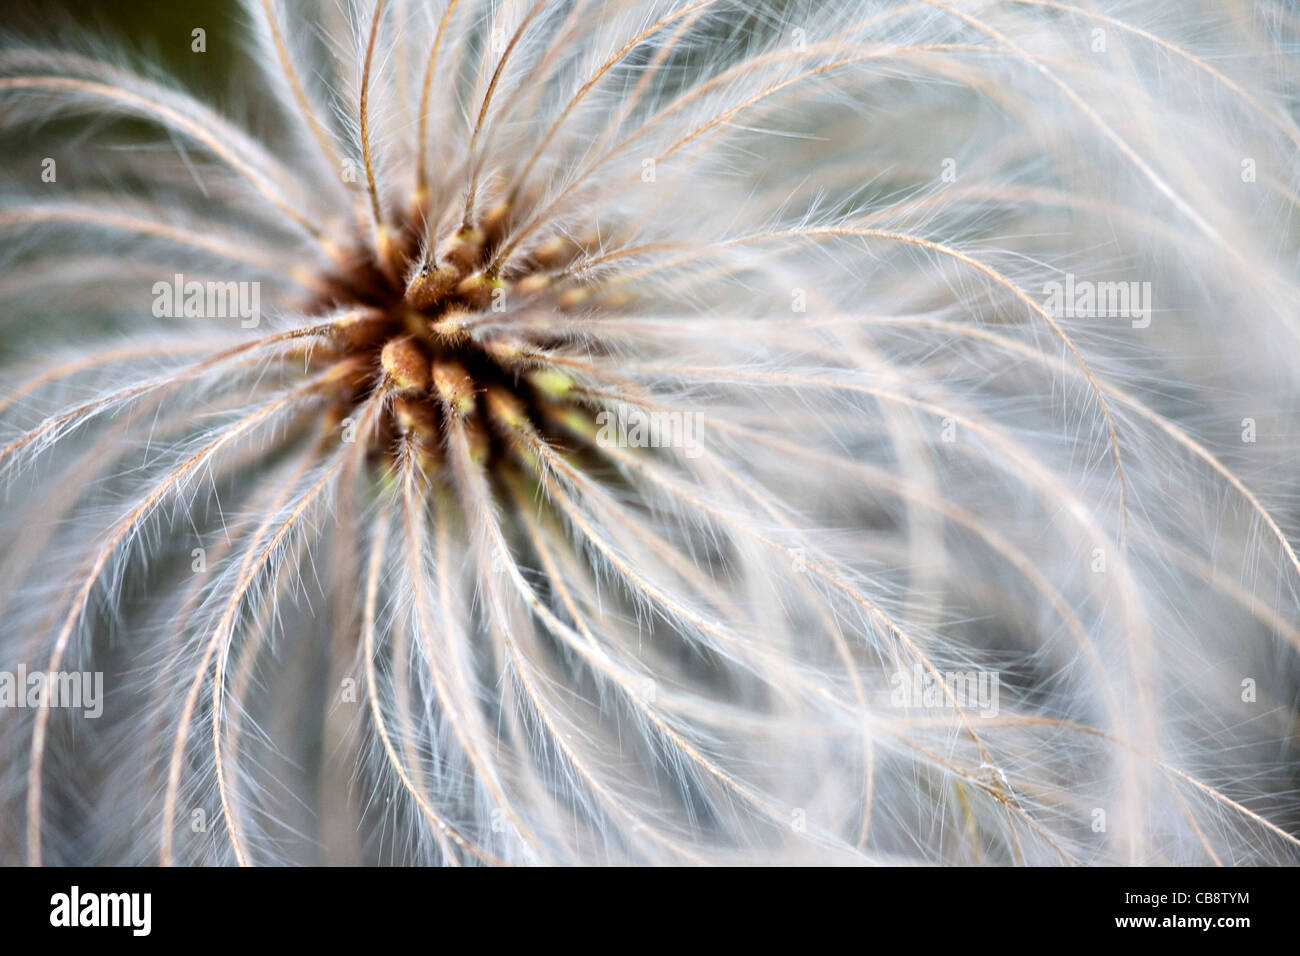 Soft Abstract Clematis Seed Head Stock Photo